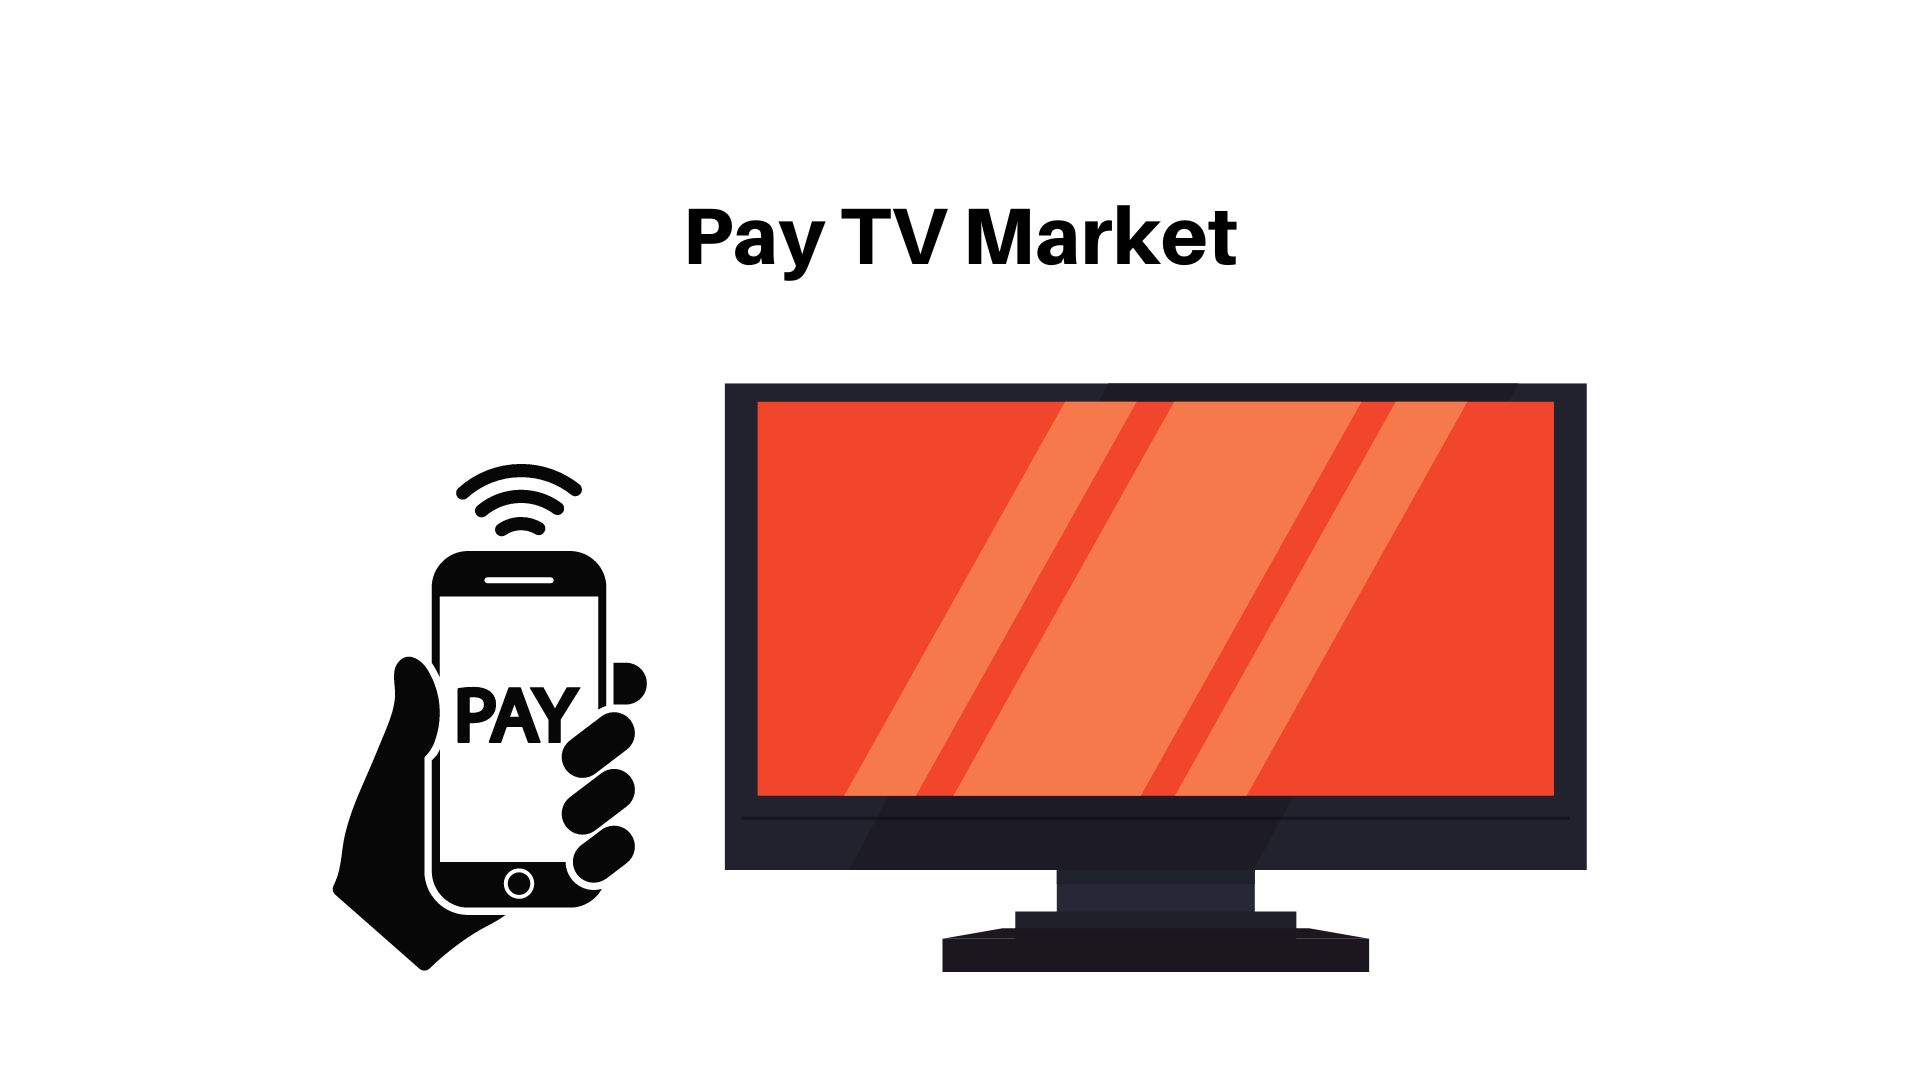 Pay TV Market is poised to grow at a CAGR of 2.7% by 2032